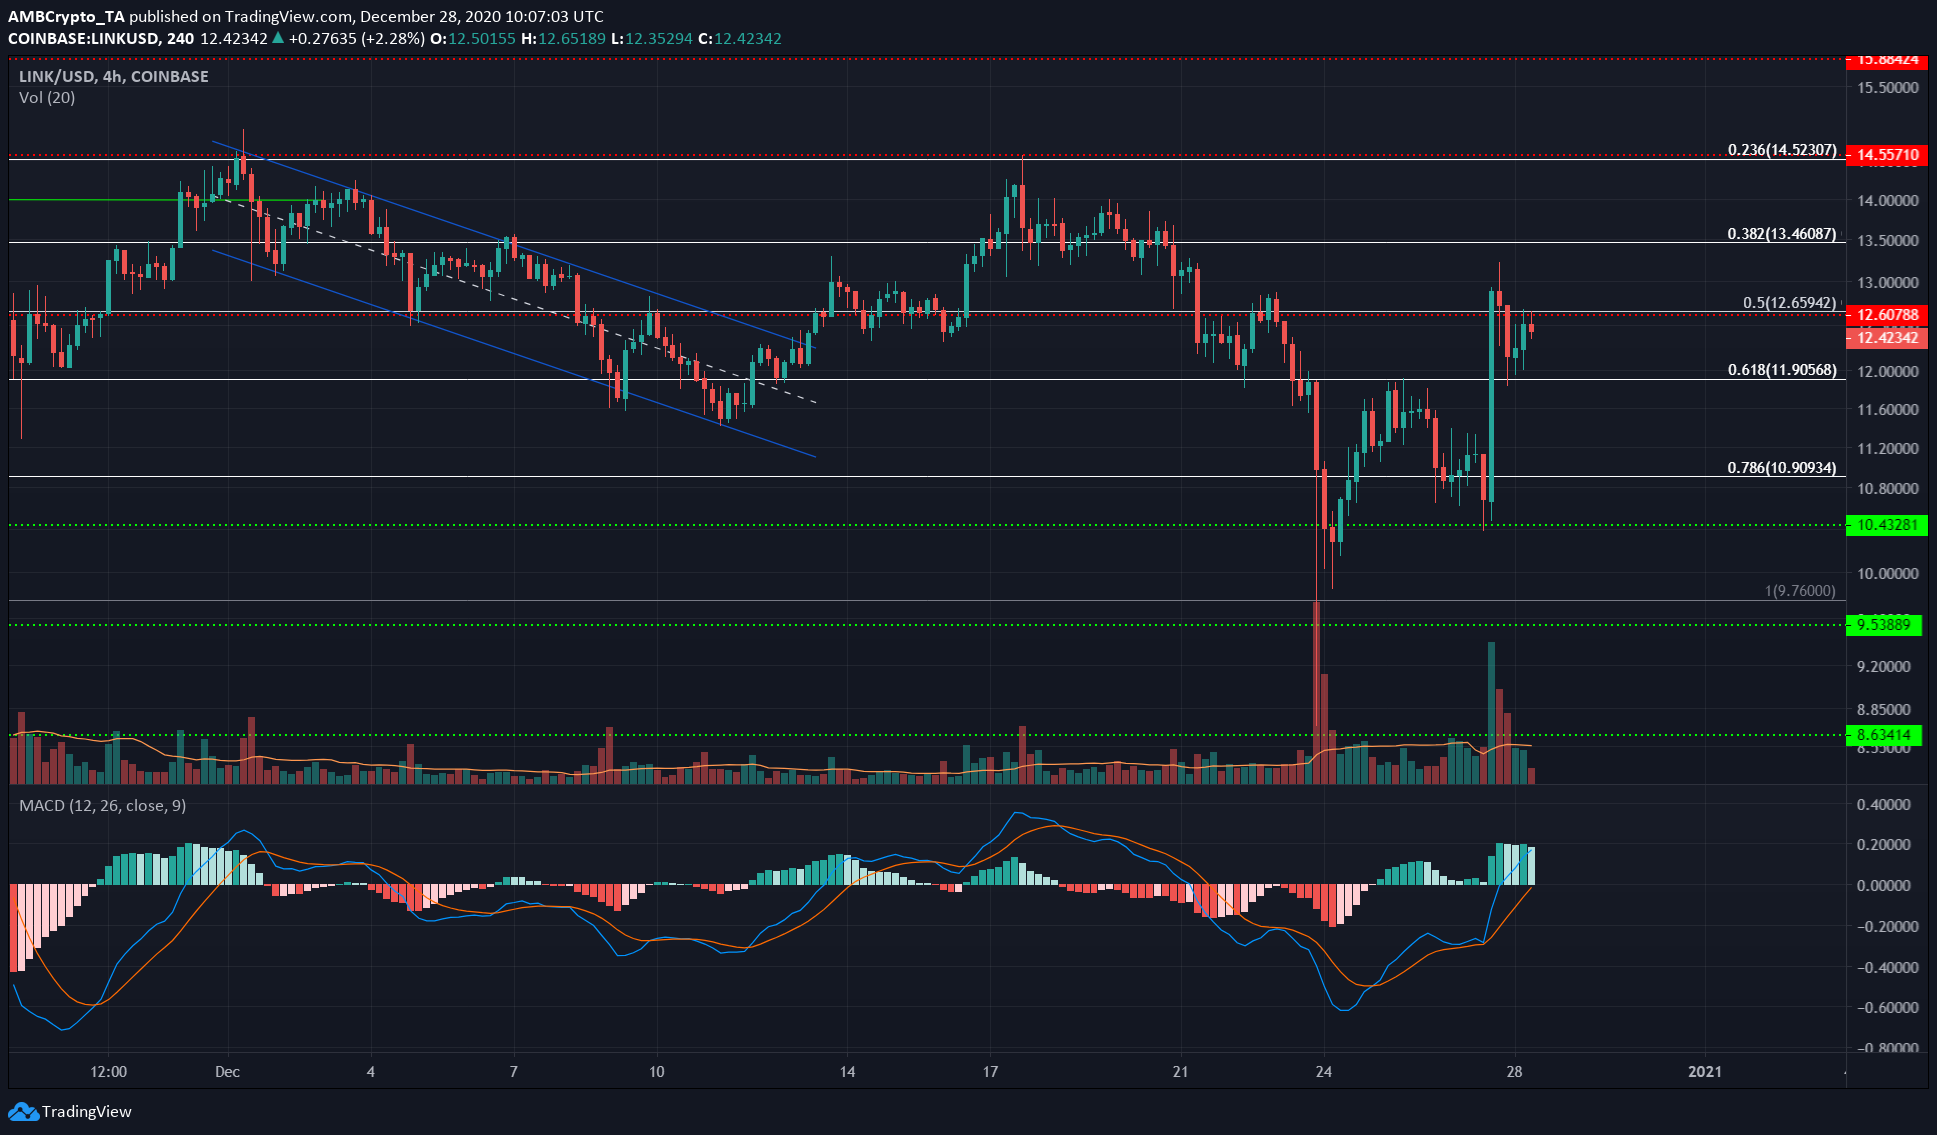 Chainlink, Aave, FTX Token Price Analysis: 28 December